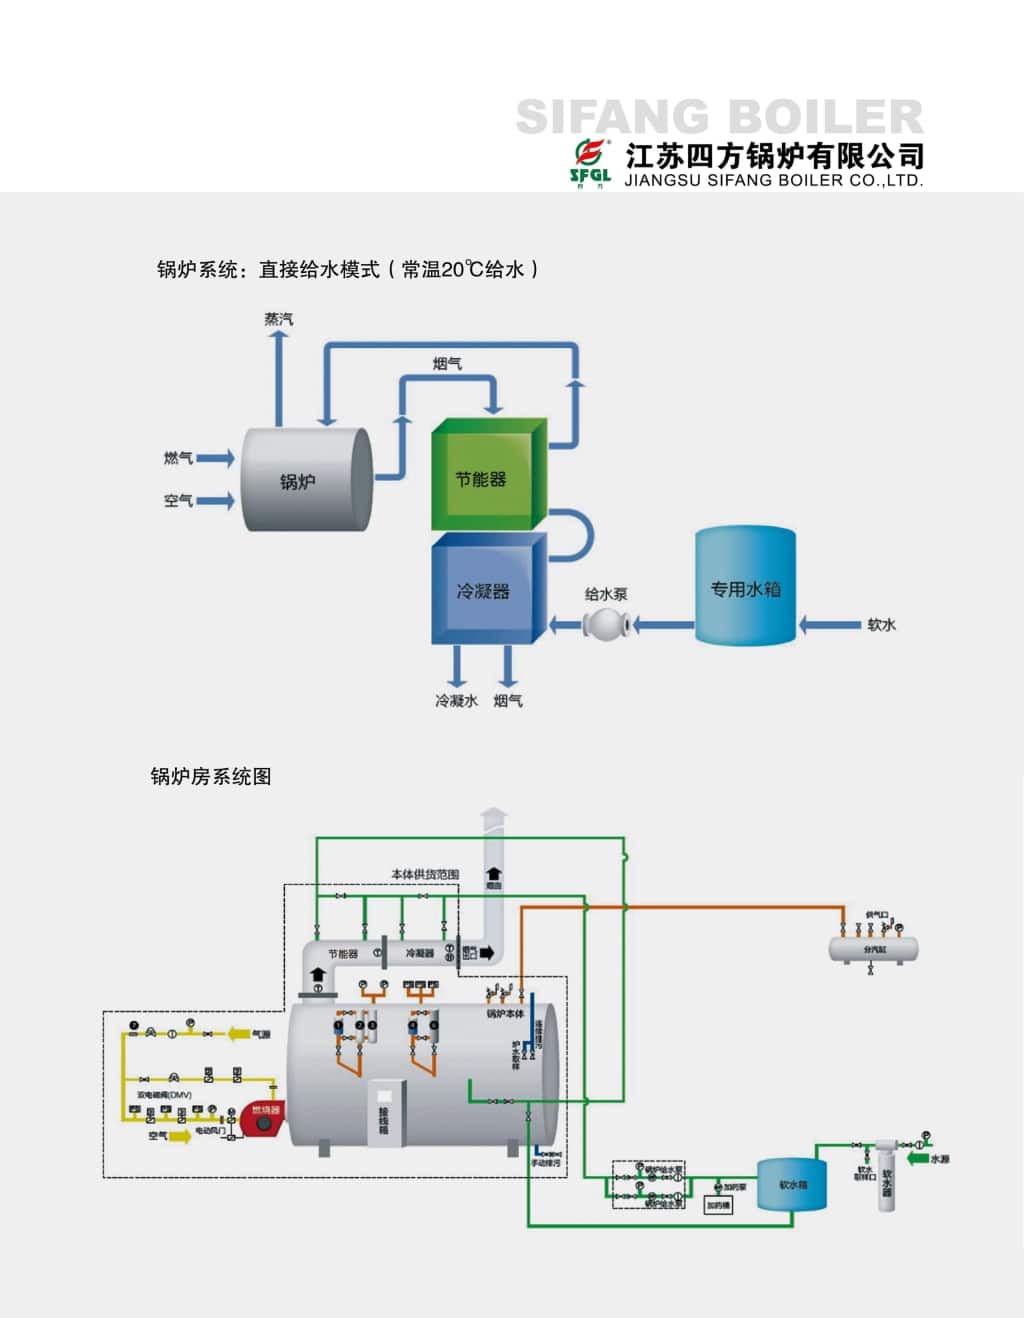 WNSL series fully automatic gas (oil) steam condensing boiler